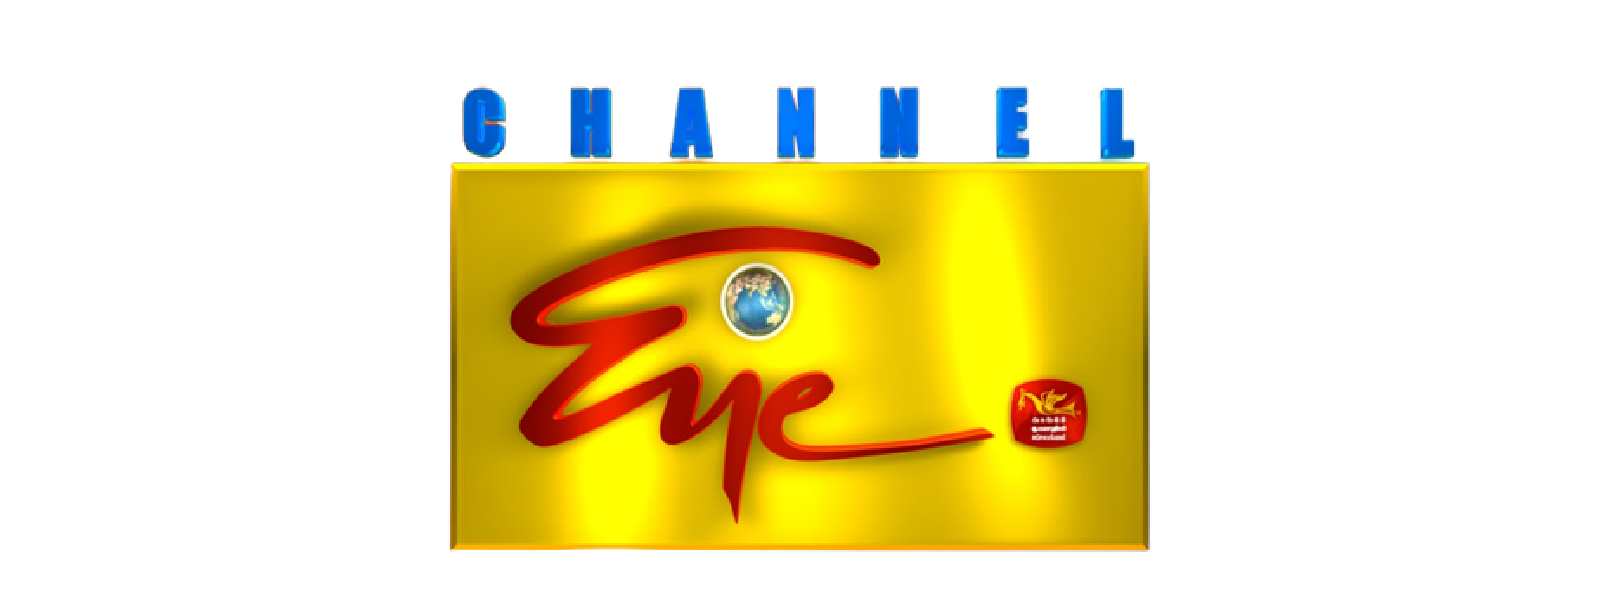 Was the airtime of Channel Eye leased or not?